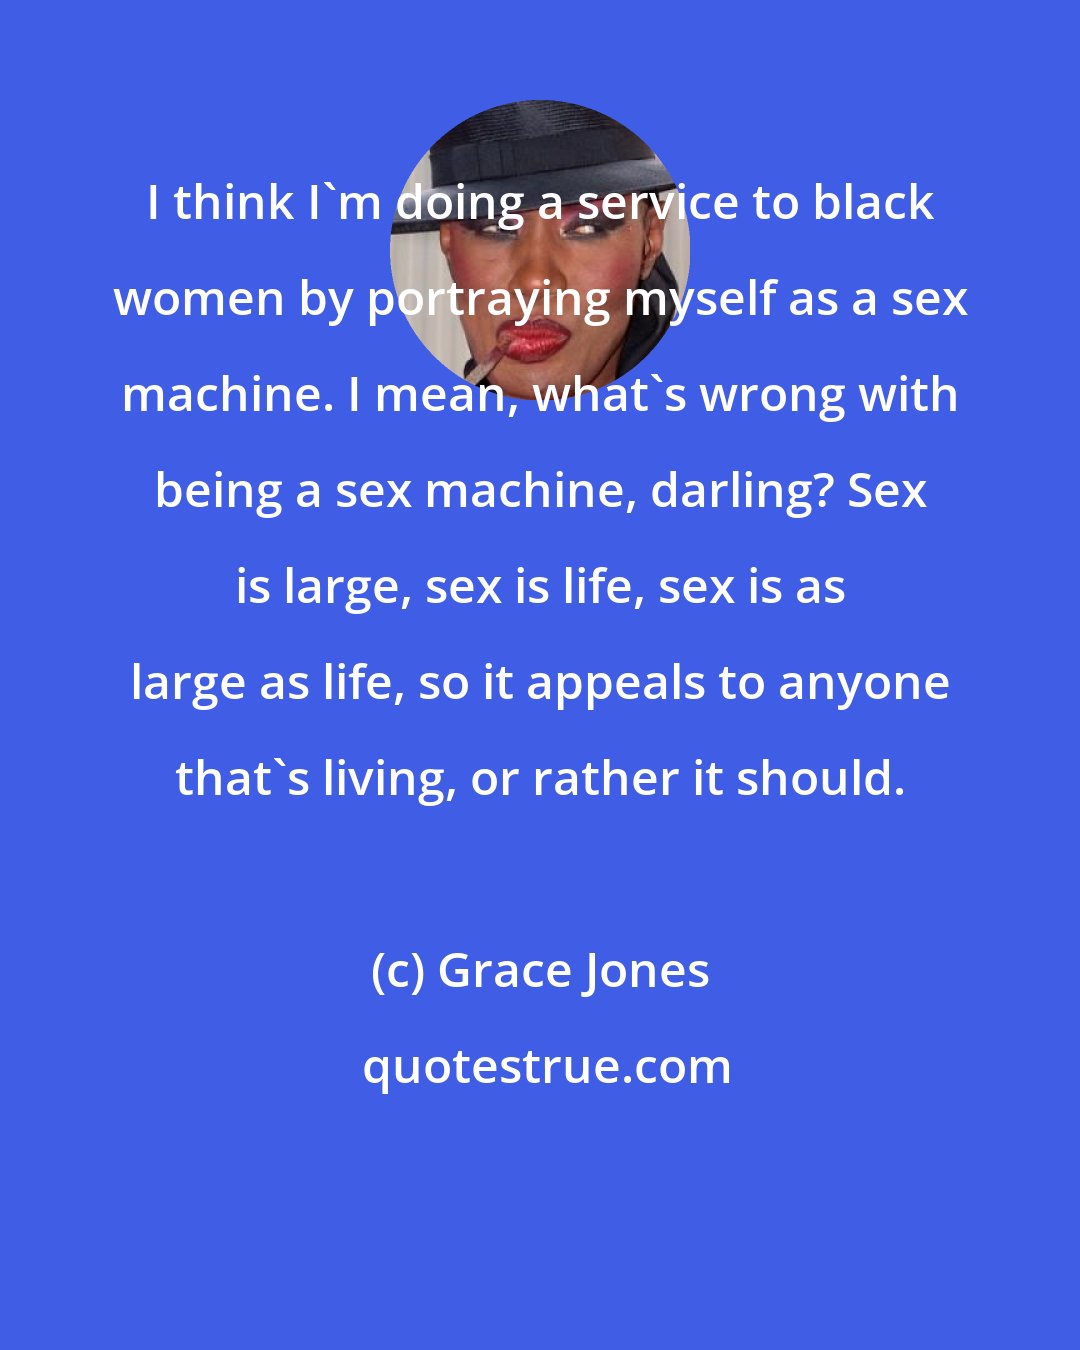 Grace Jones: I think I'm doing a service to black women by portraying myself as a sex machine. I mean, what's wrong with being a sex machine, darling? Sex is large, sex is life, sex is as large as life, so it appeals to anyone that's living, or rather it should.